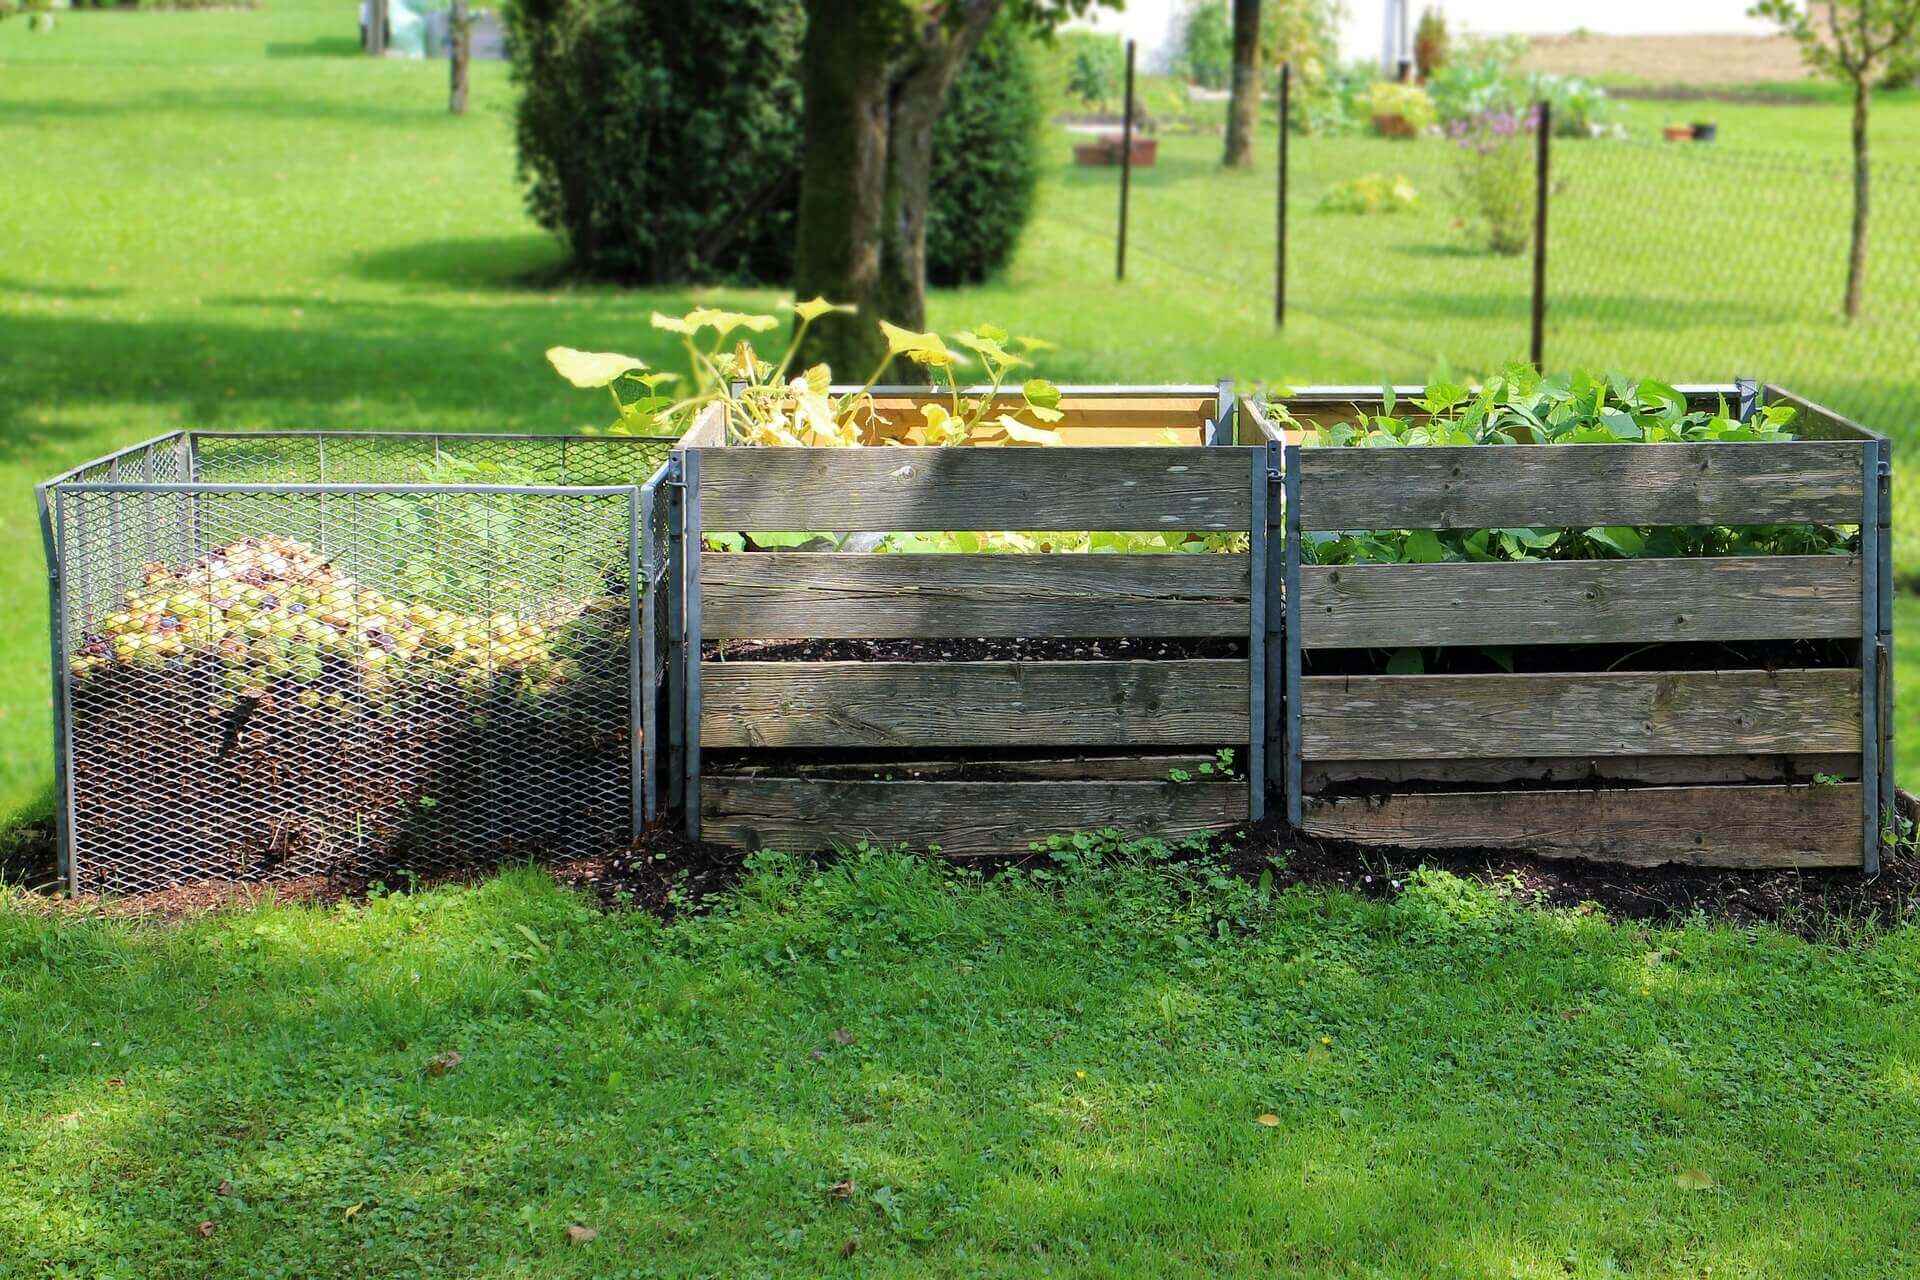 How to compost: compost bins